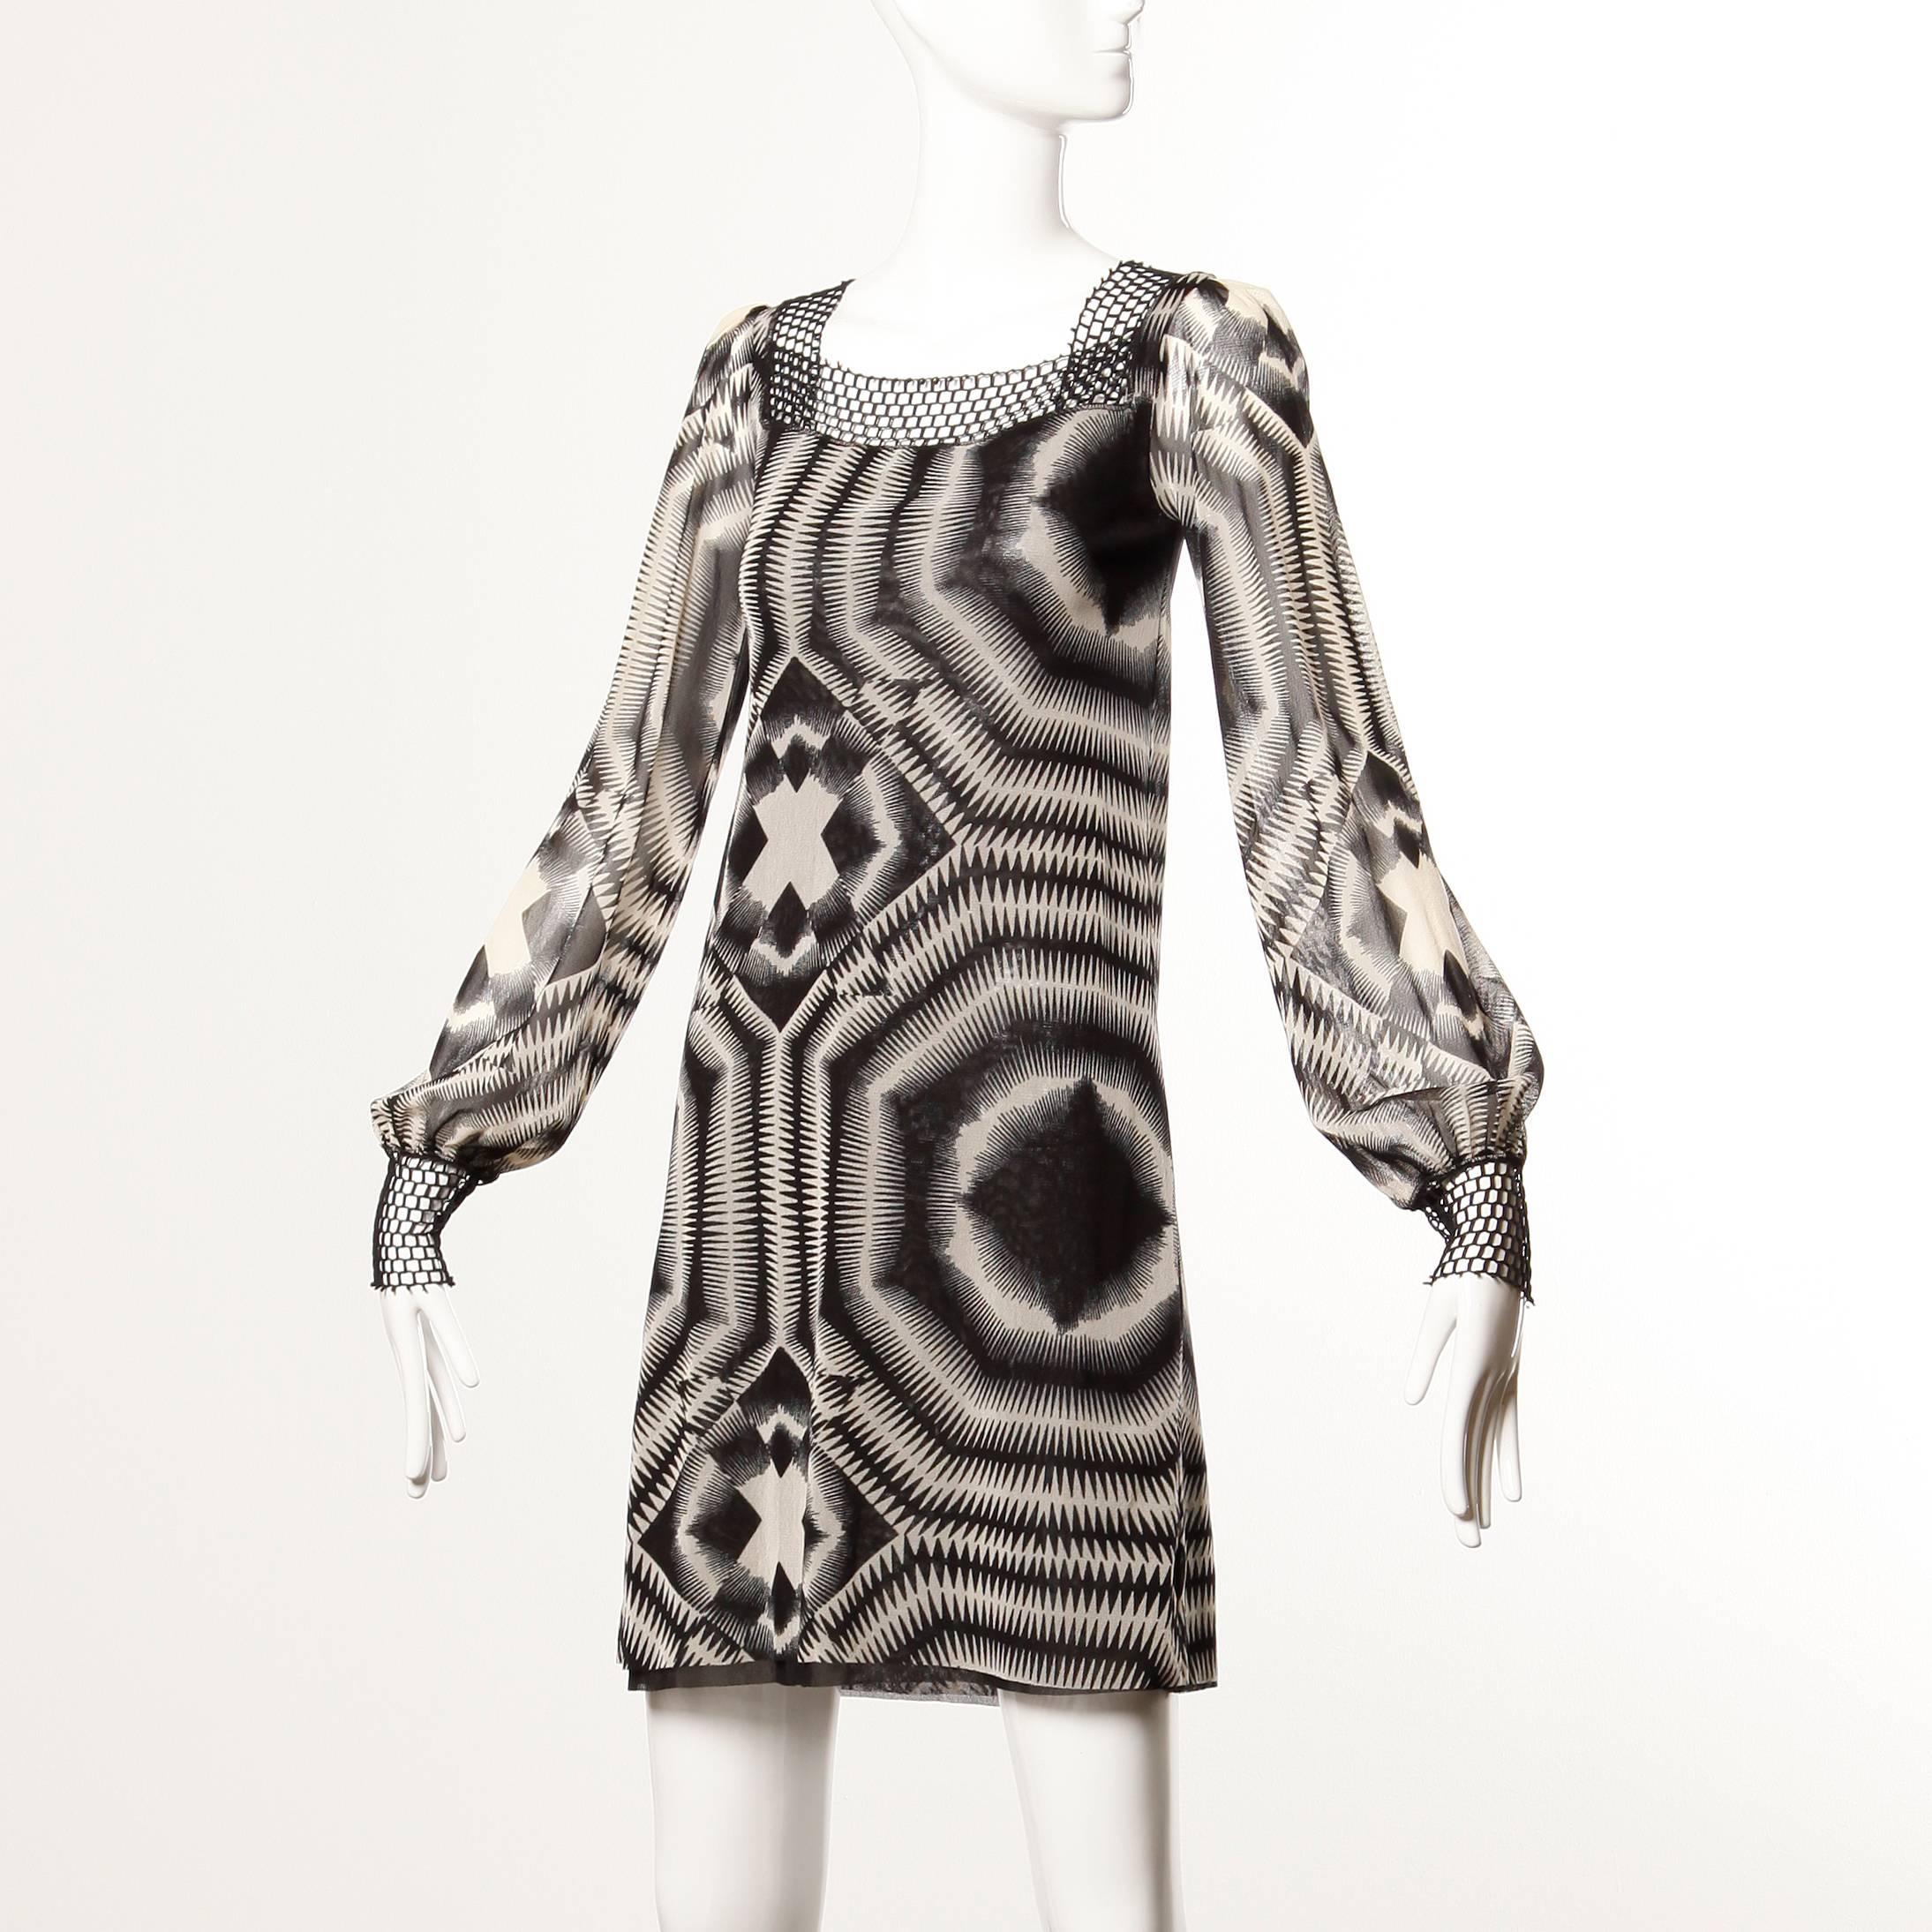 Vintage op art graphic printed mesh dress by Jean Paul Gaultier with a mod 1960s vibe. 

Details: 

Marked Size: S
Color: Black/ Off White
Fabric: 100% Nylon Mesh
Label: Jean Paul Gaultier

Measurements: 

Bust: 30